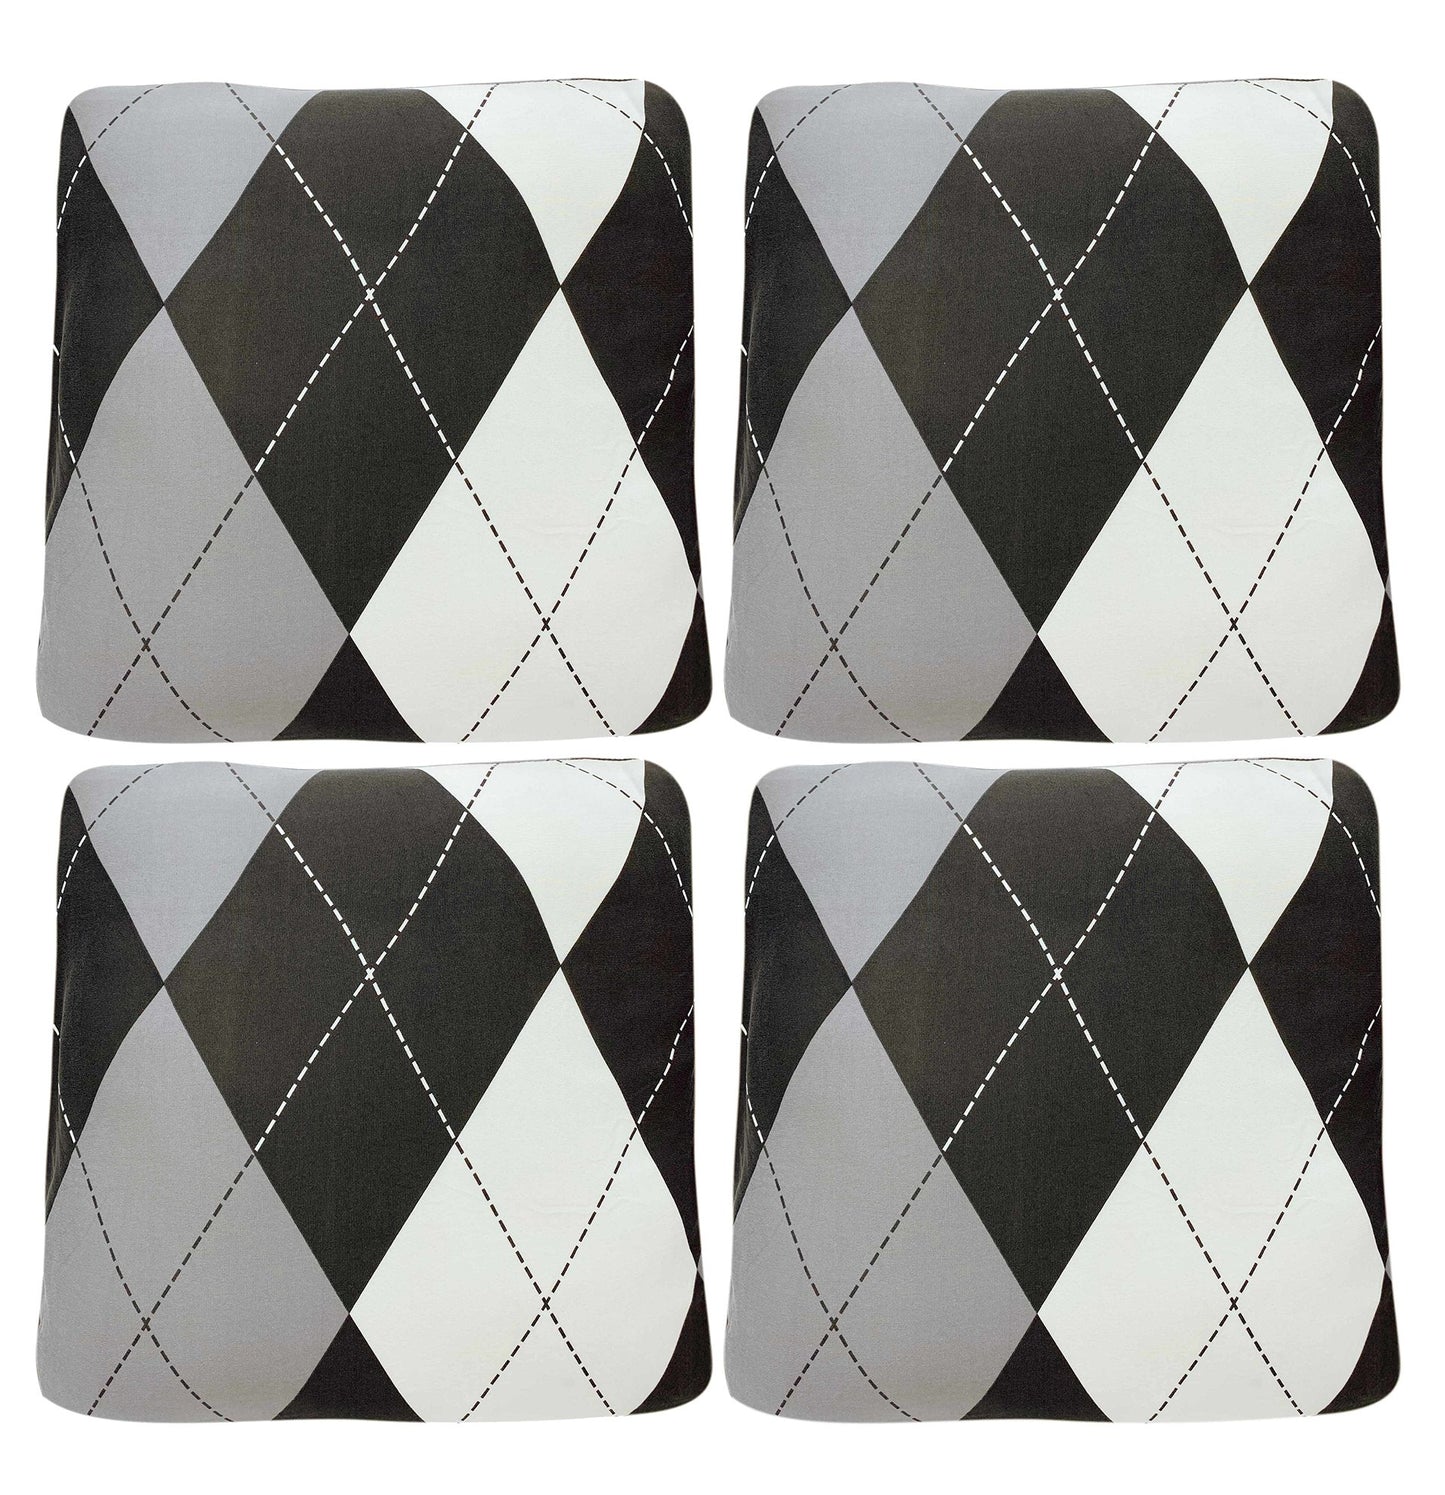 Polyester Cushion Cover - Black/Grey